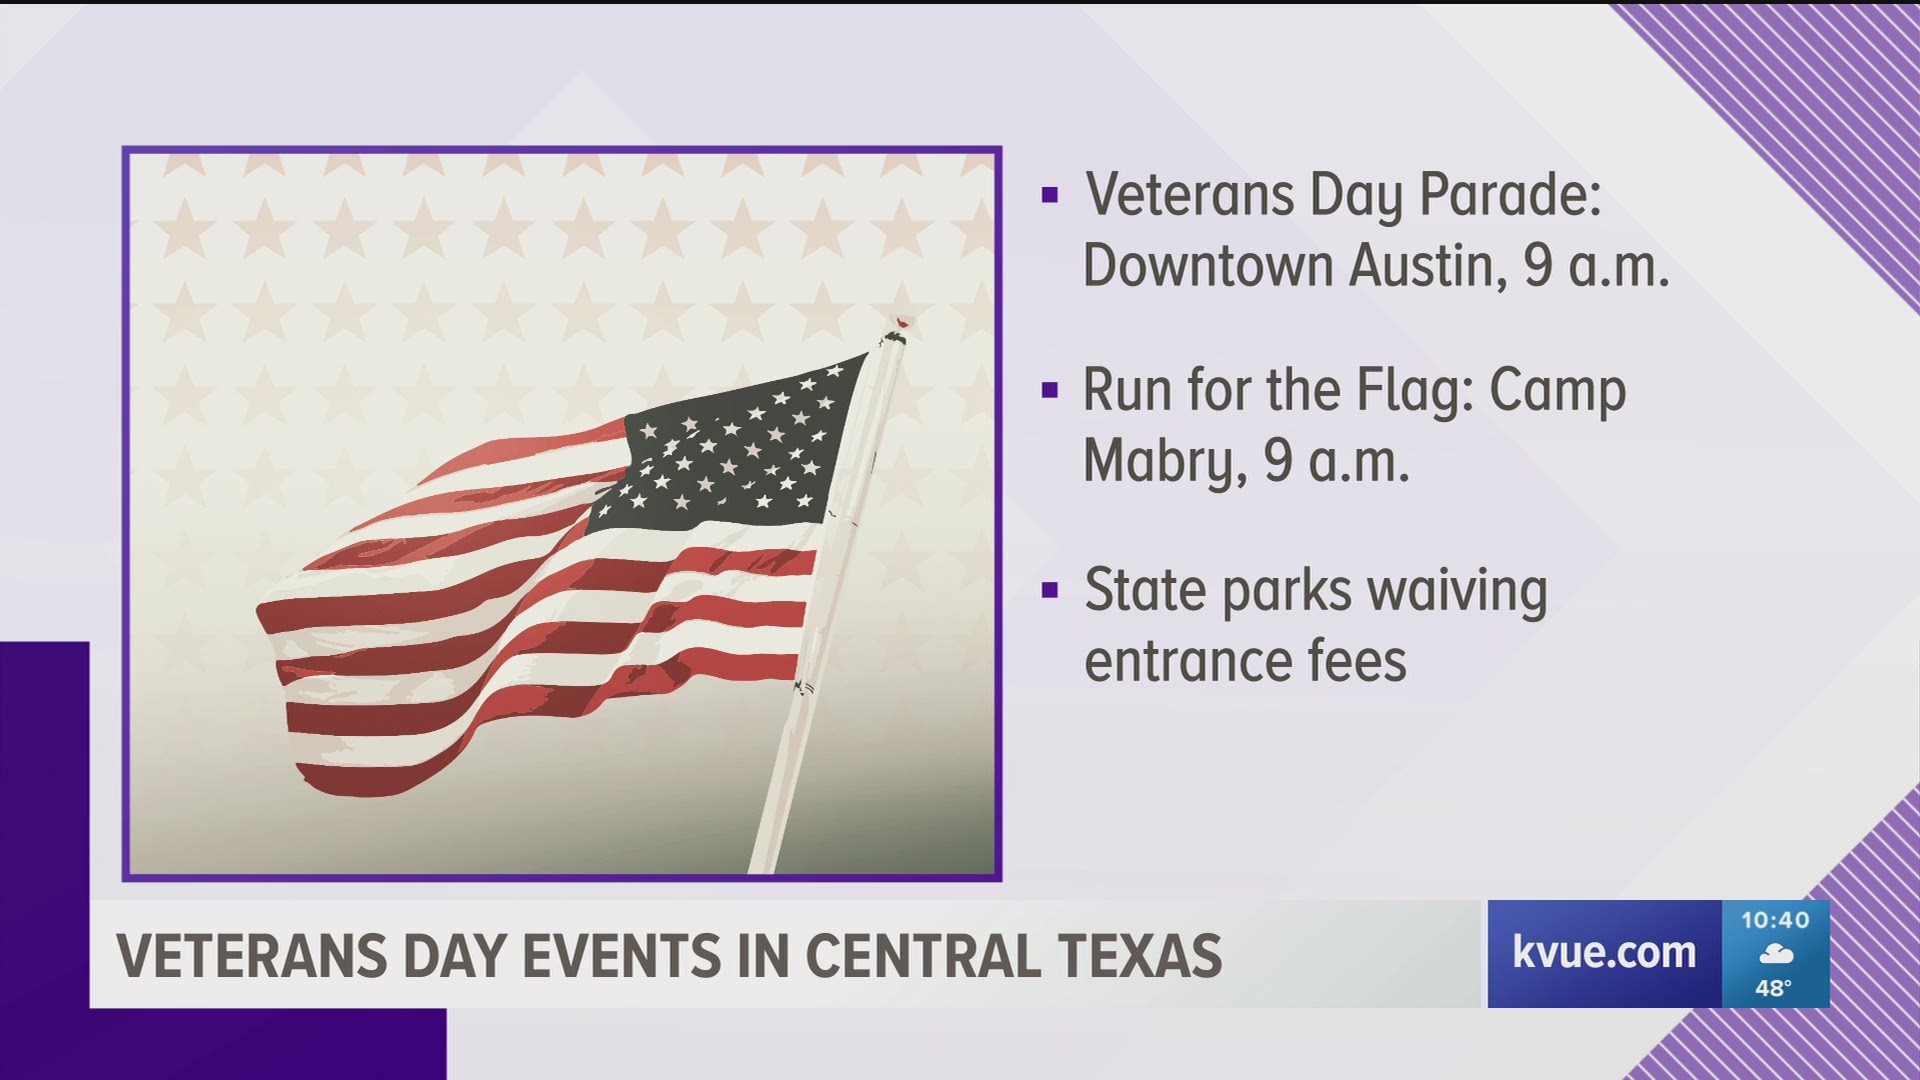 Here's a few ways you can celebrate Veterans Day in Austin.